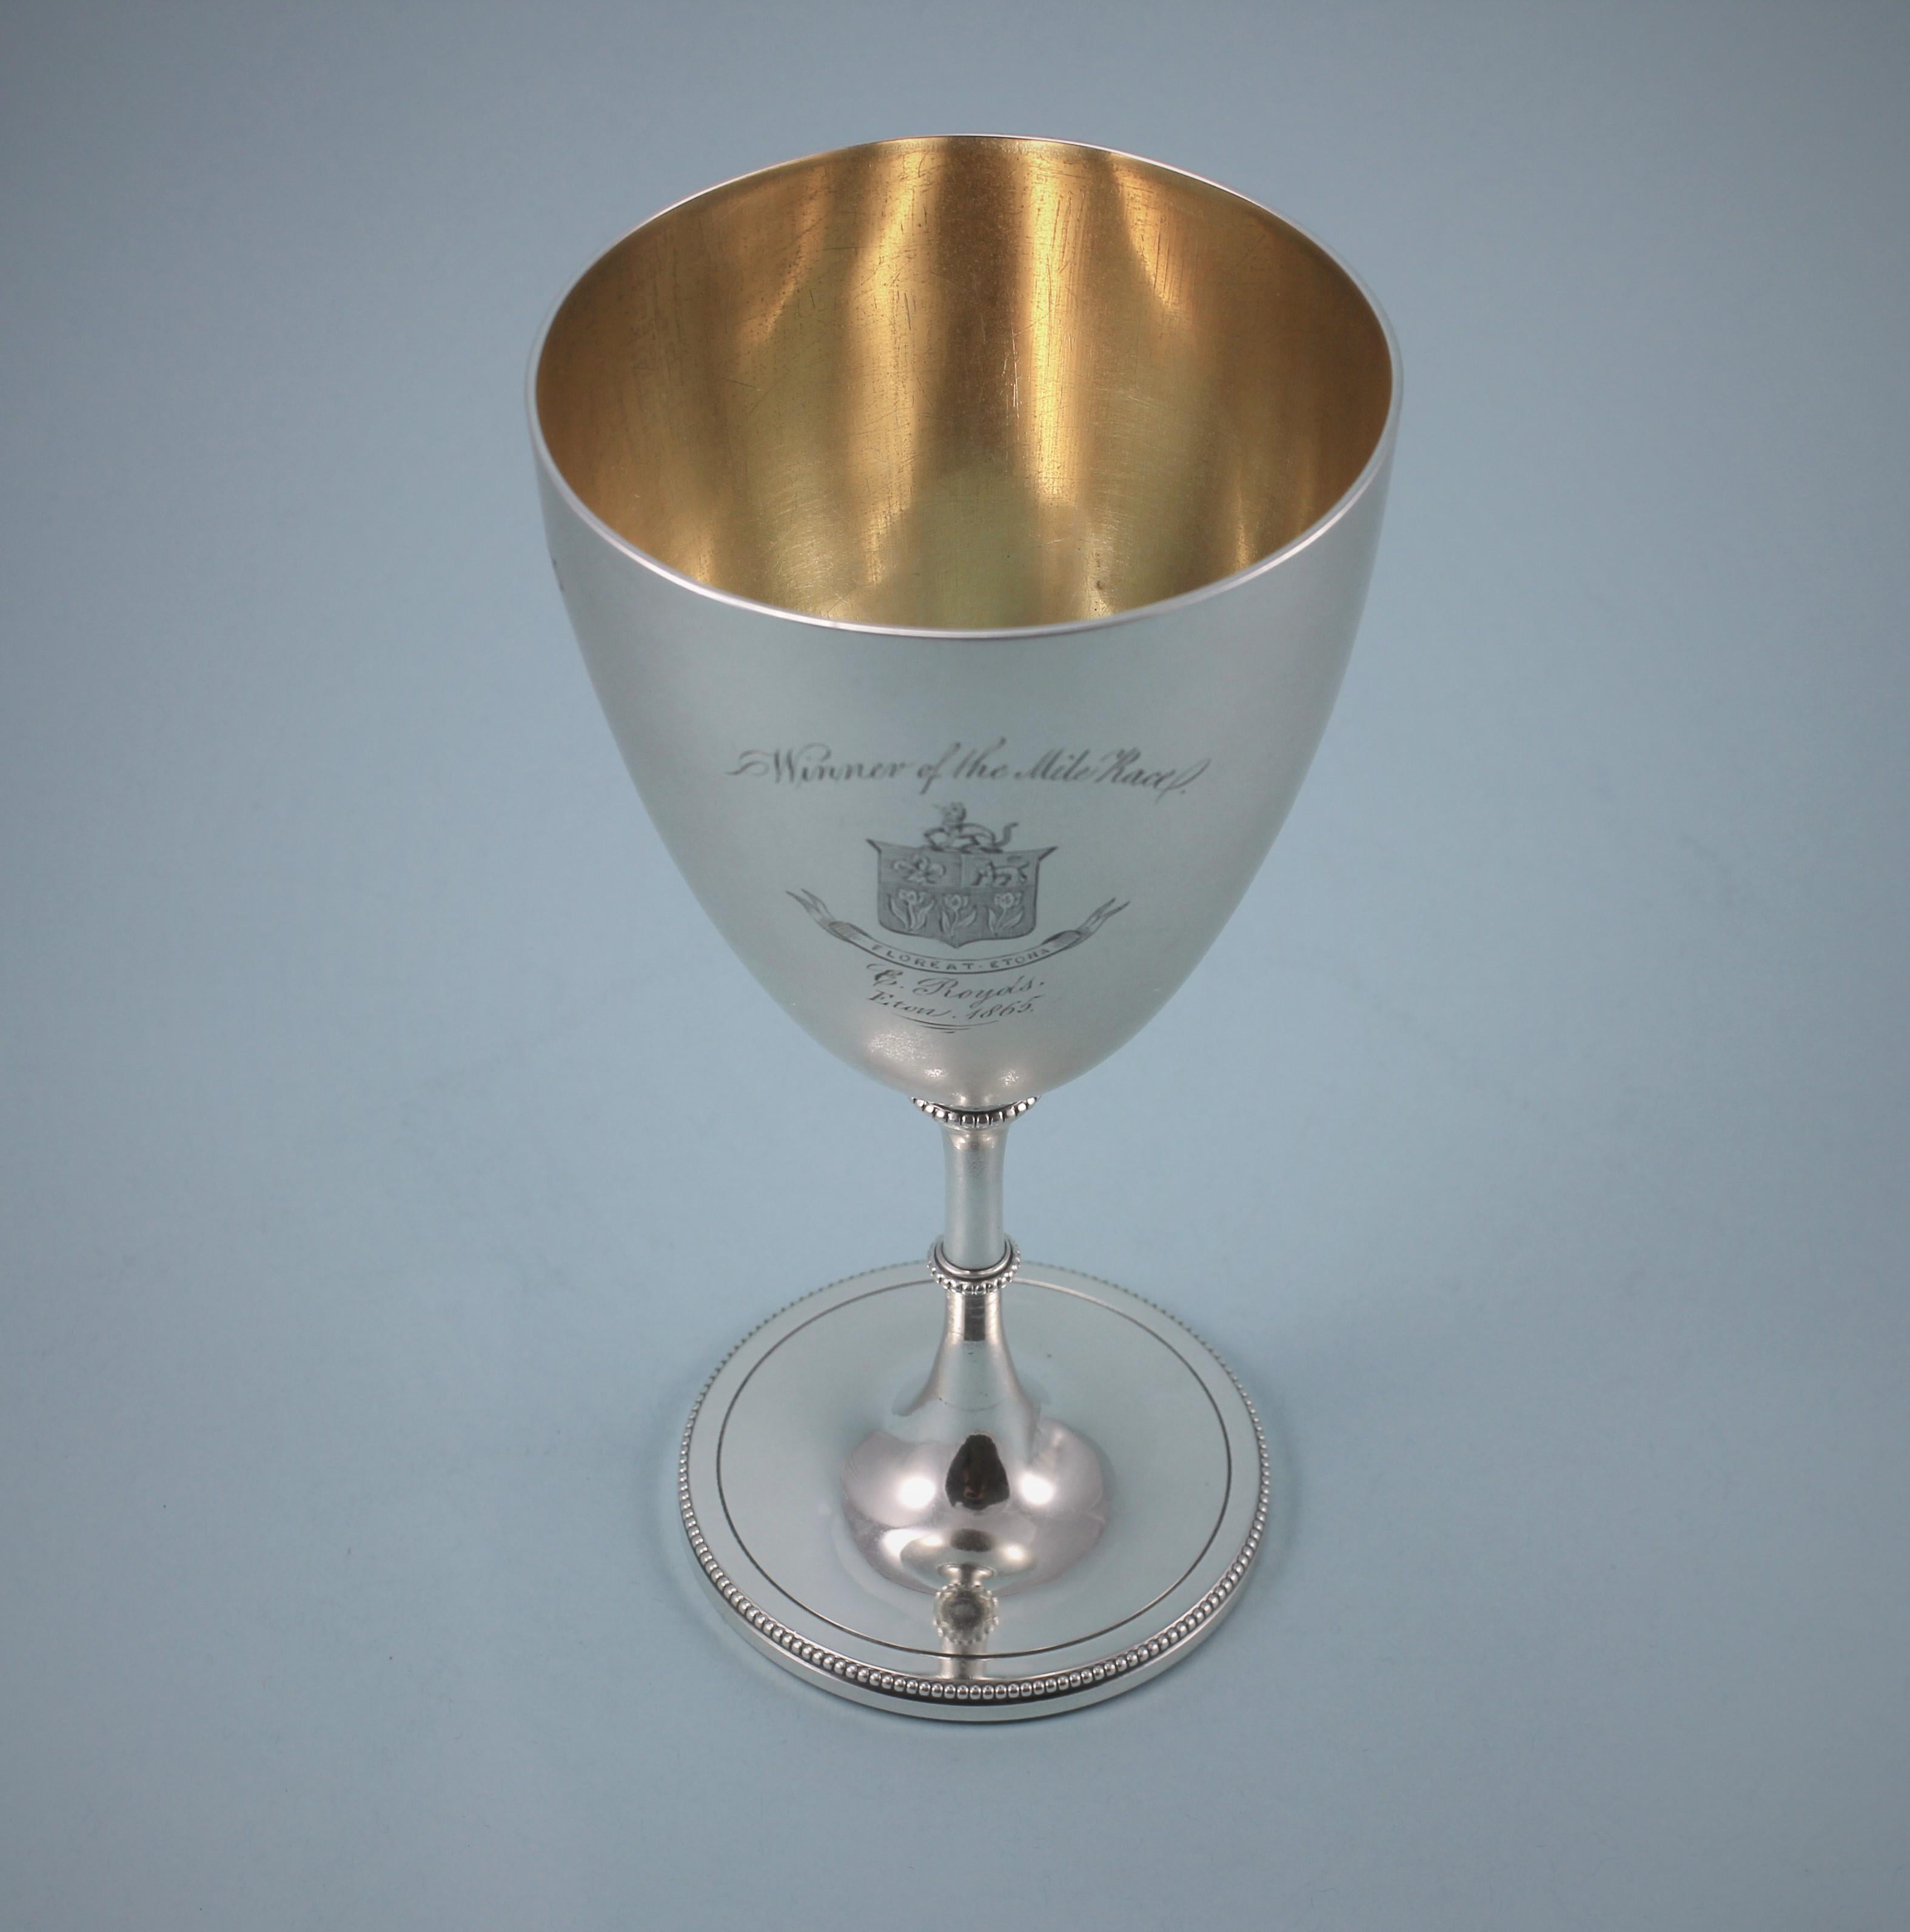 Elegant Victorian Eton College sterling silver goblet, silver gilt inside the bowl.
Maker: Daniel and Charles Houle. London 1864.
This goblet is one of a pair and is being sold individually.
The goblet is perfectly plain apart from the engraving